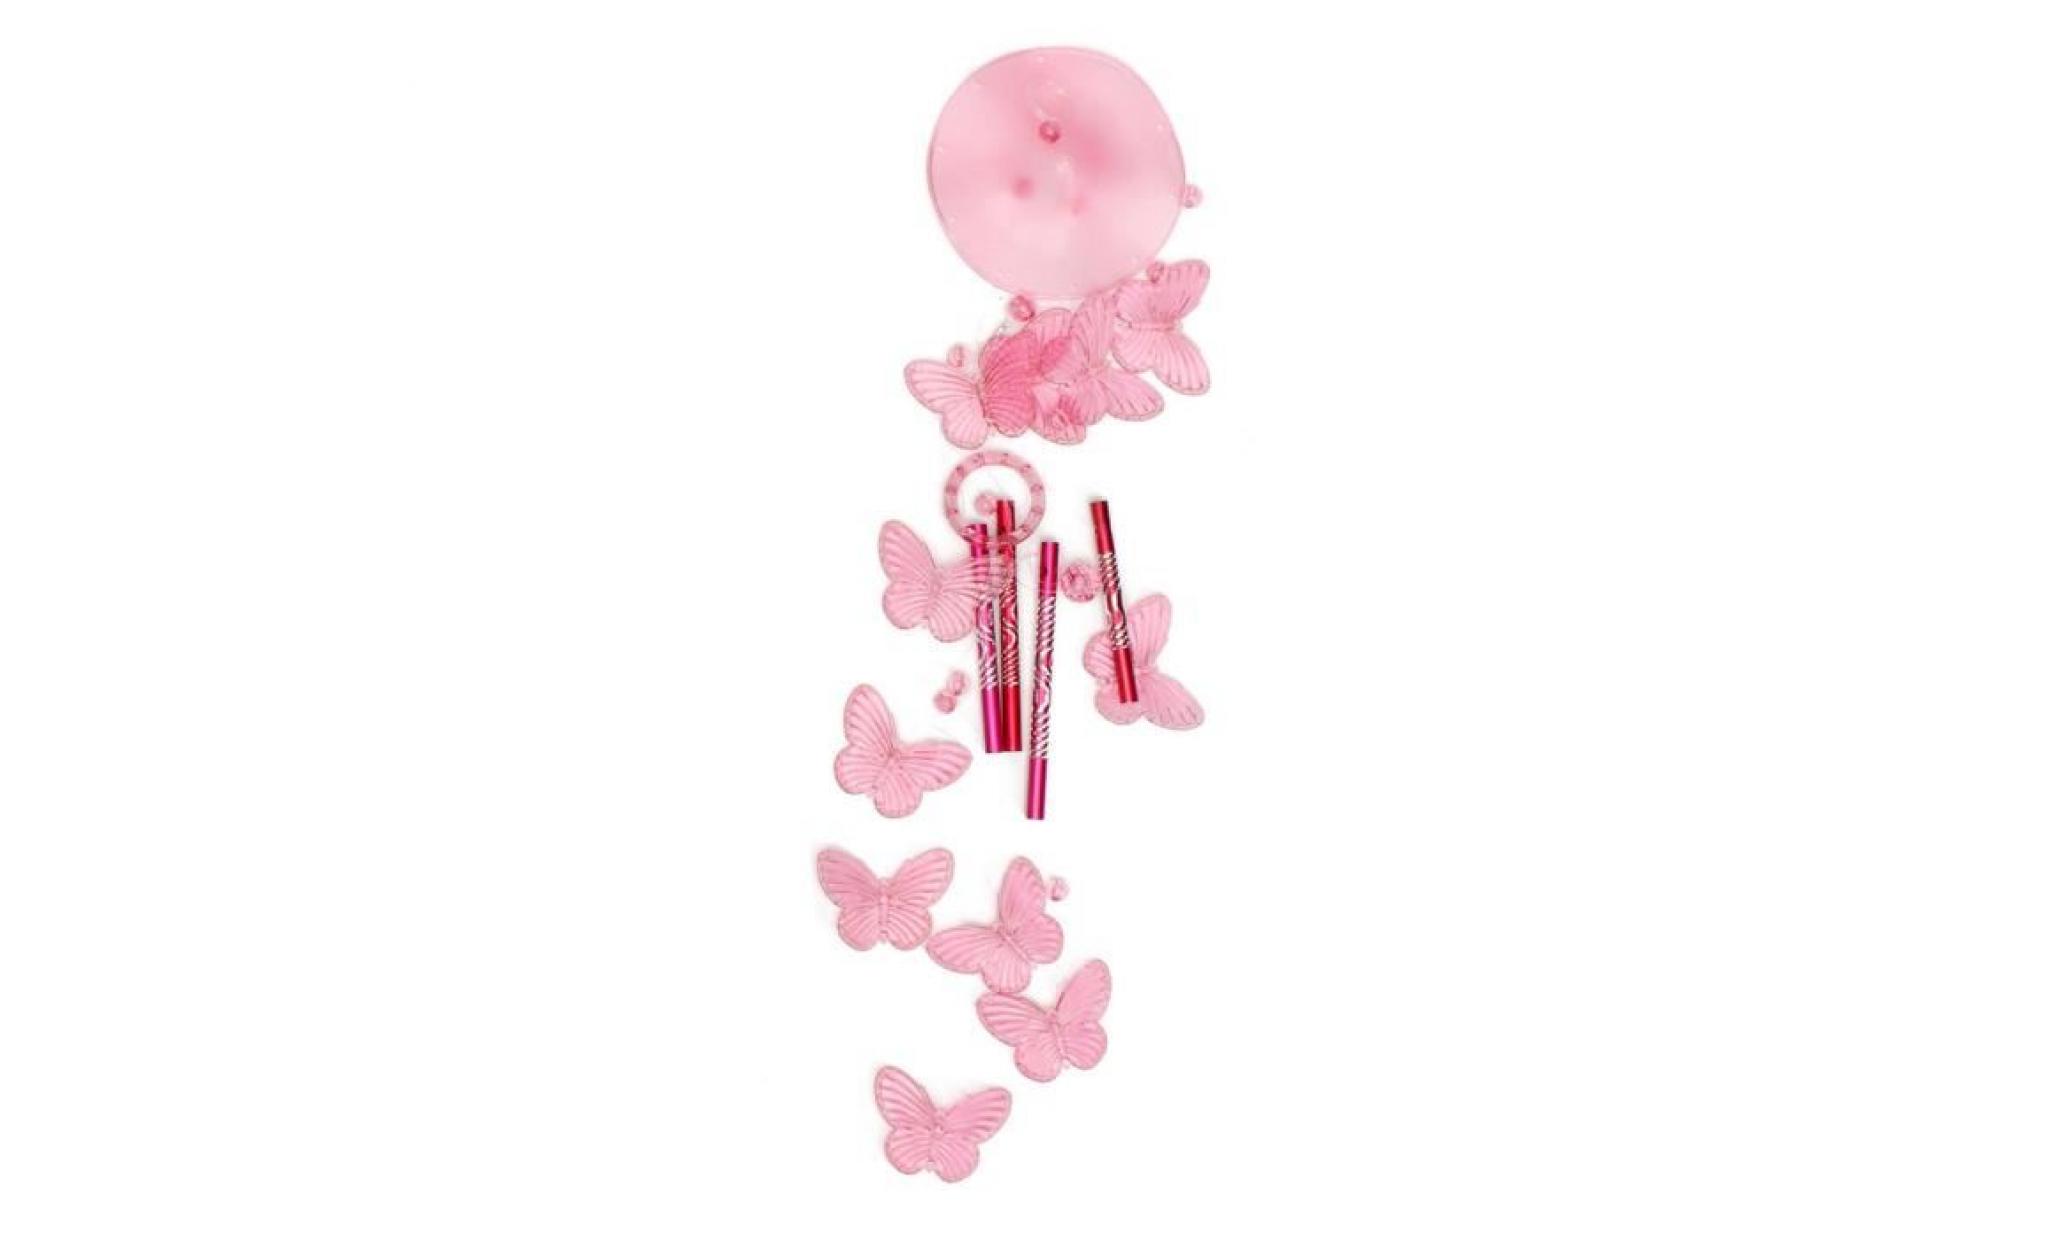 wind chime sound tubes butterfly feng shui windchimes house decoration, pink